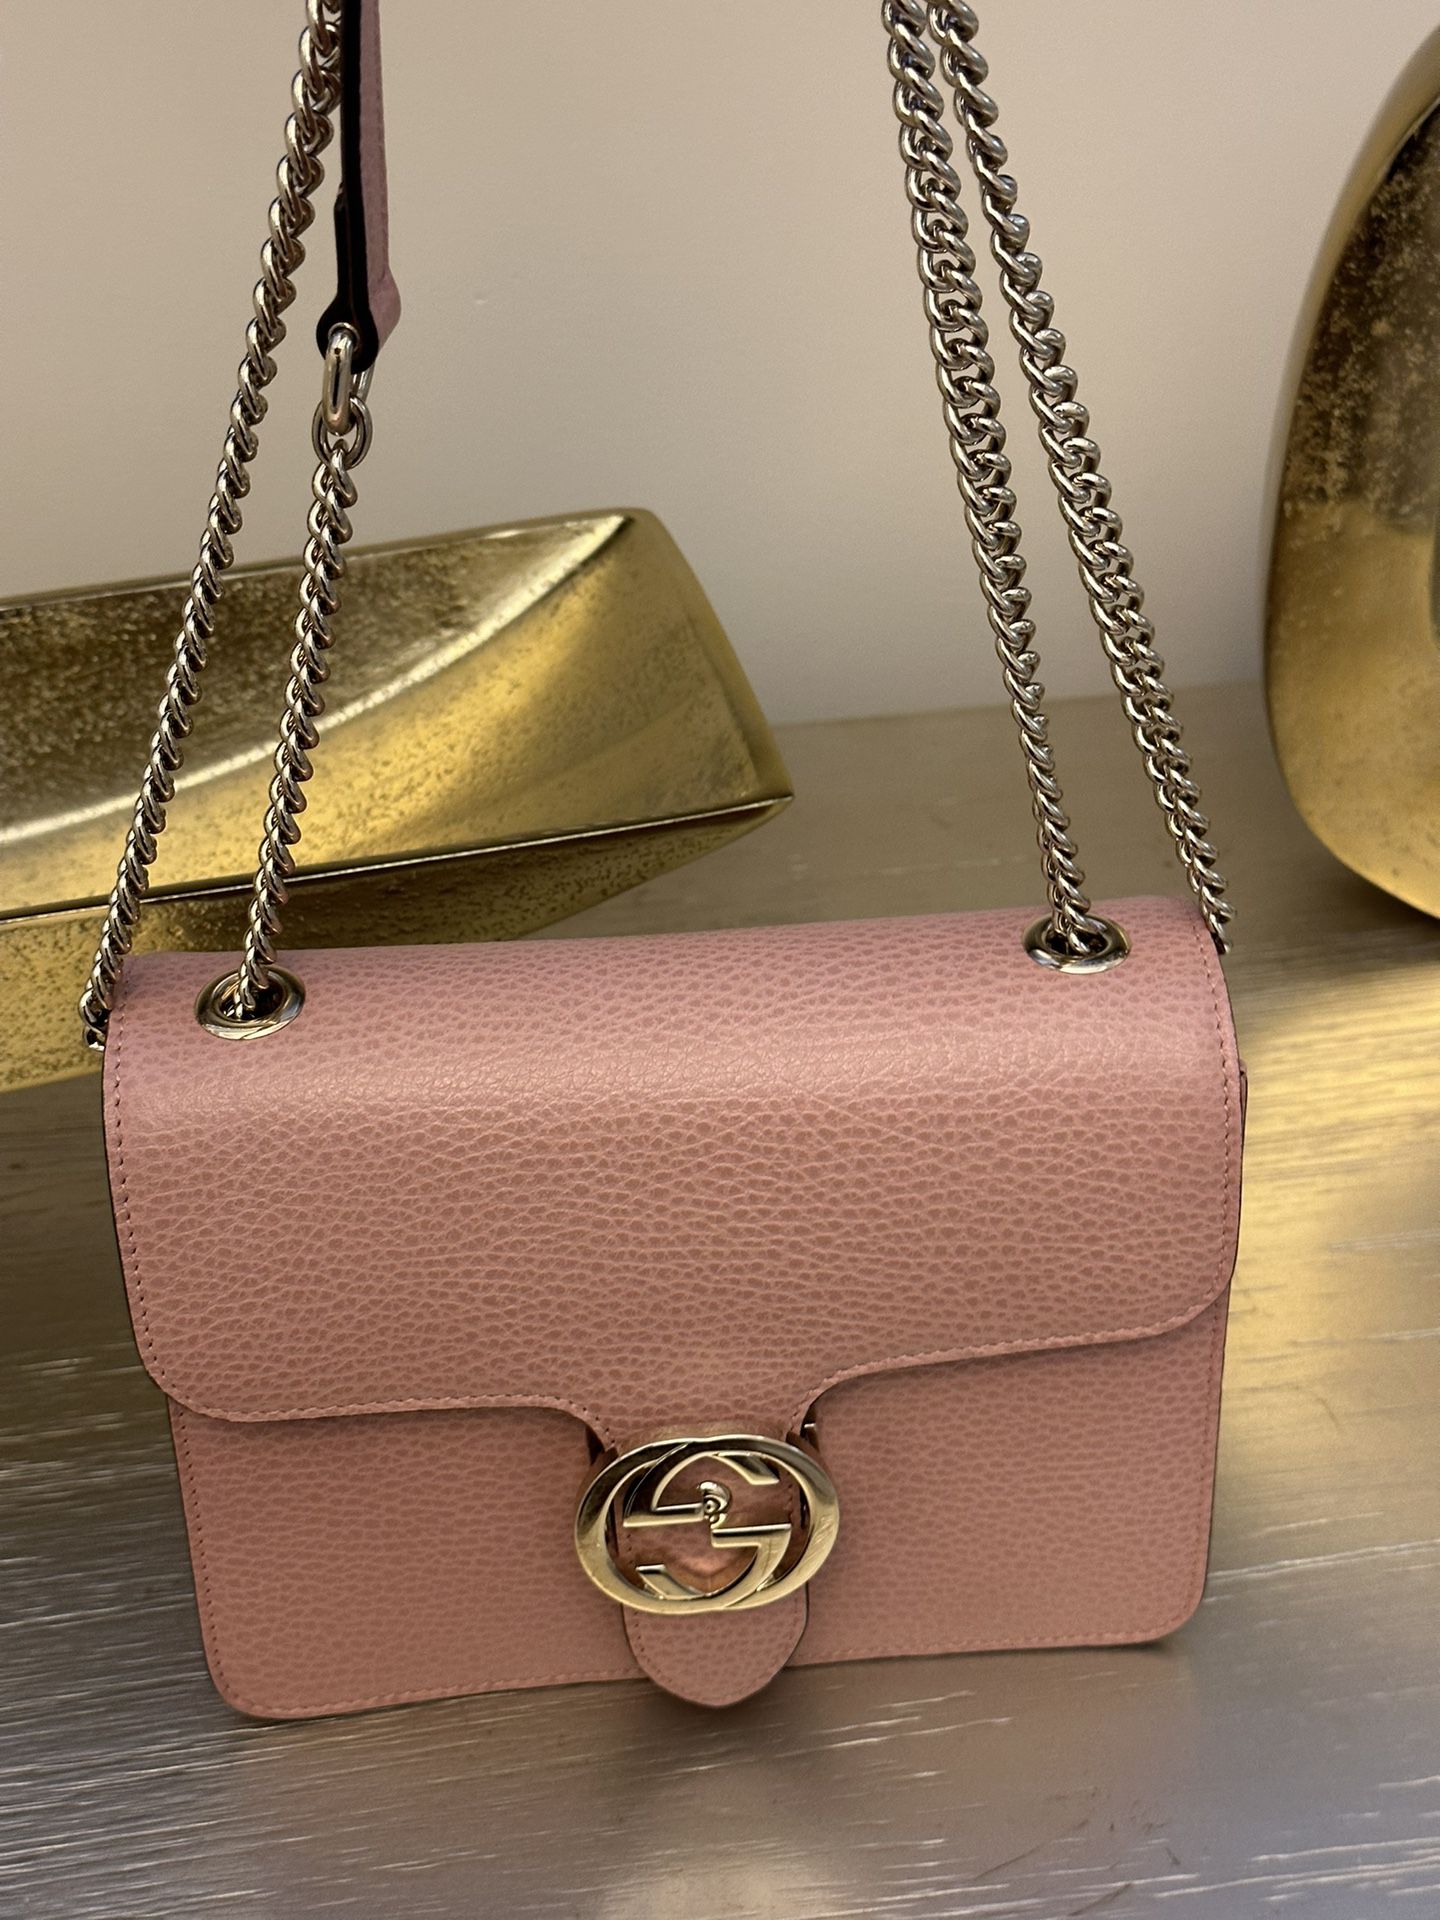 Authentic Pink Gucci Bag 